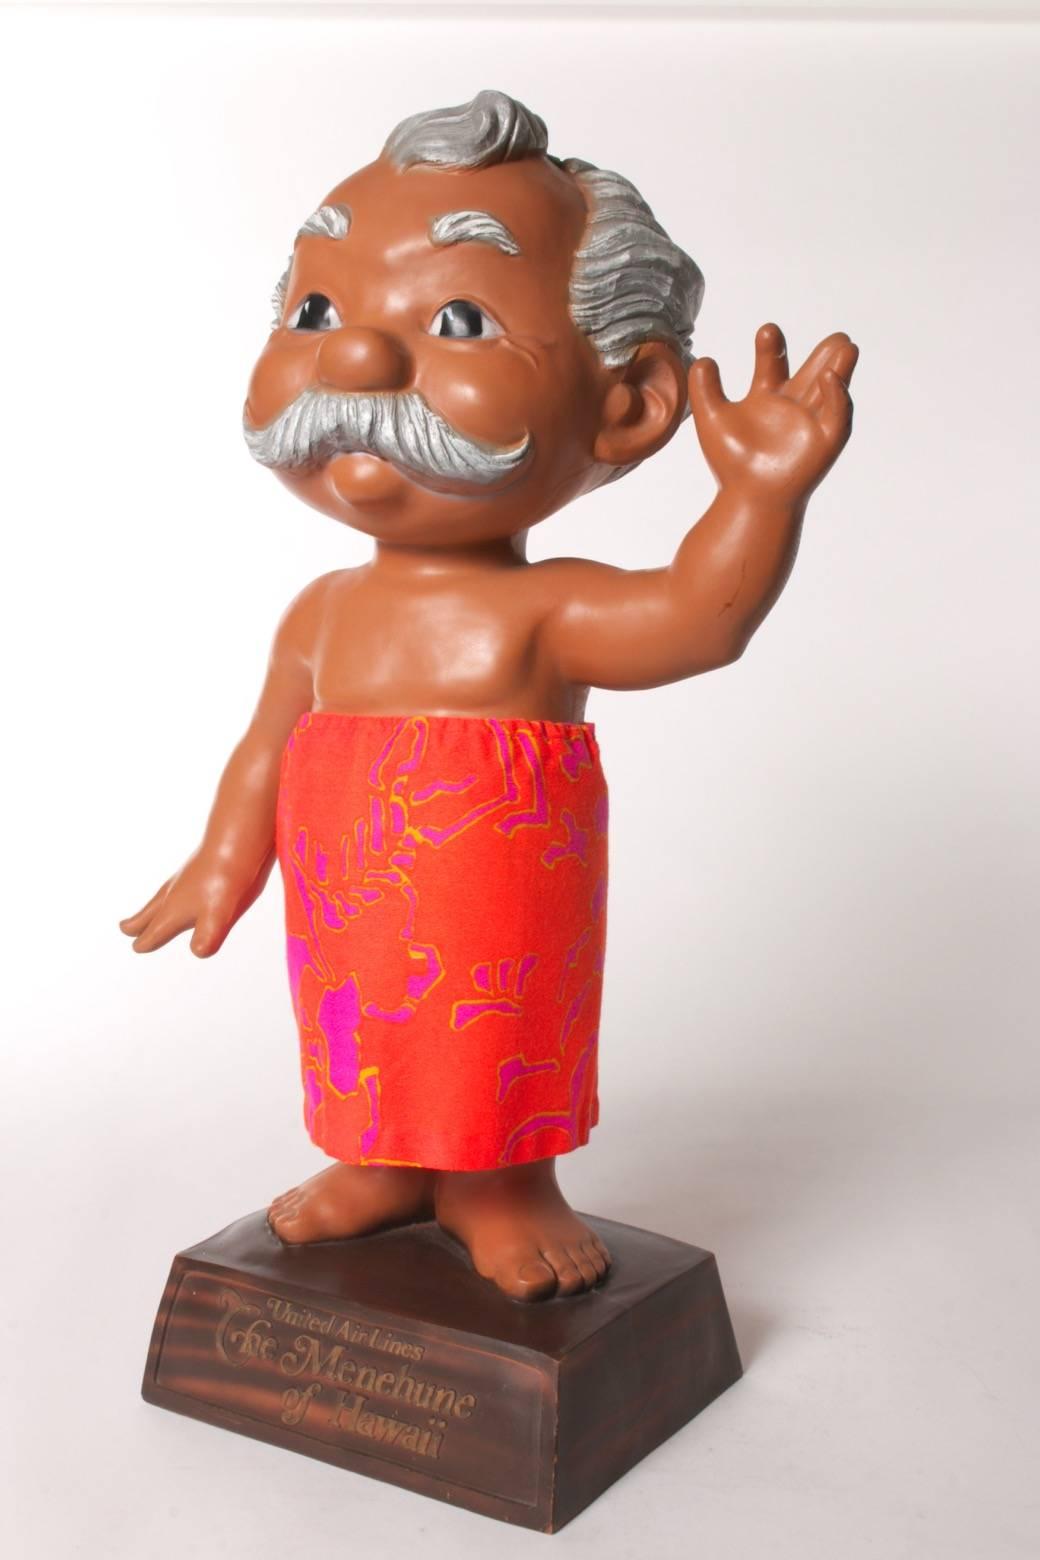 In the 1960s this Menehune hung out in Tourist offices around the
mainland USA and the Pacific Rim countries. It was a time when Hawaii
represented that 